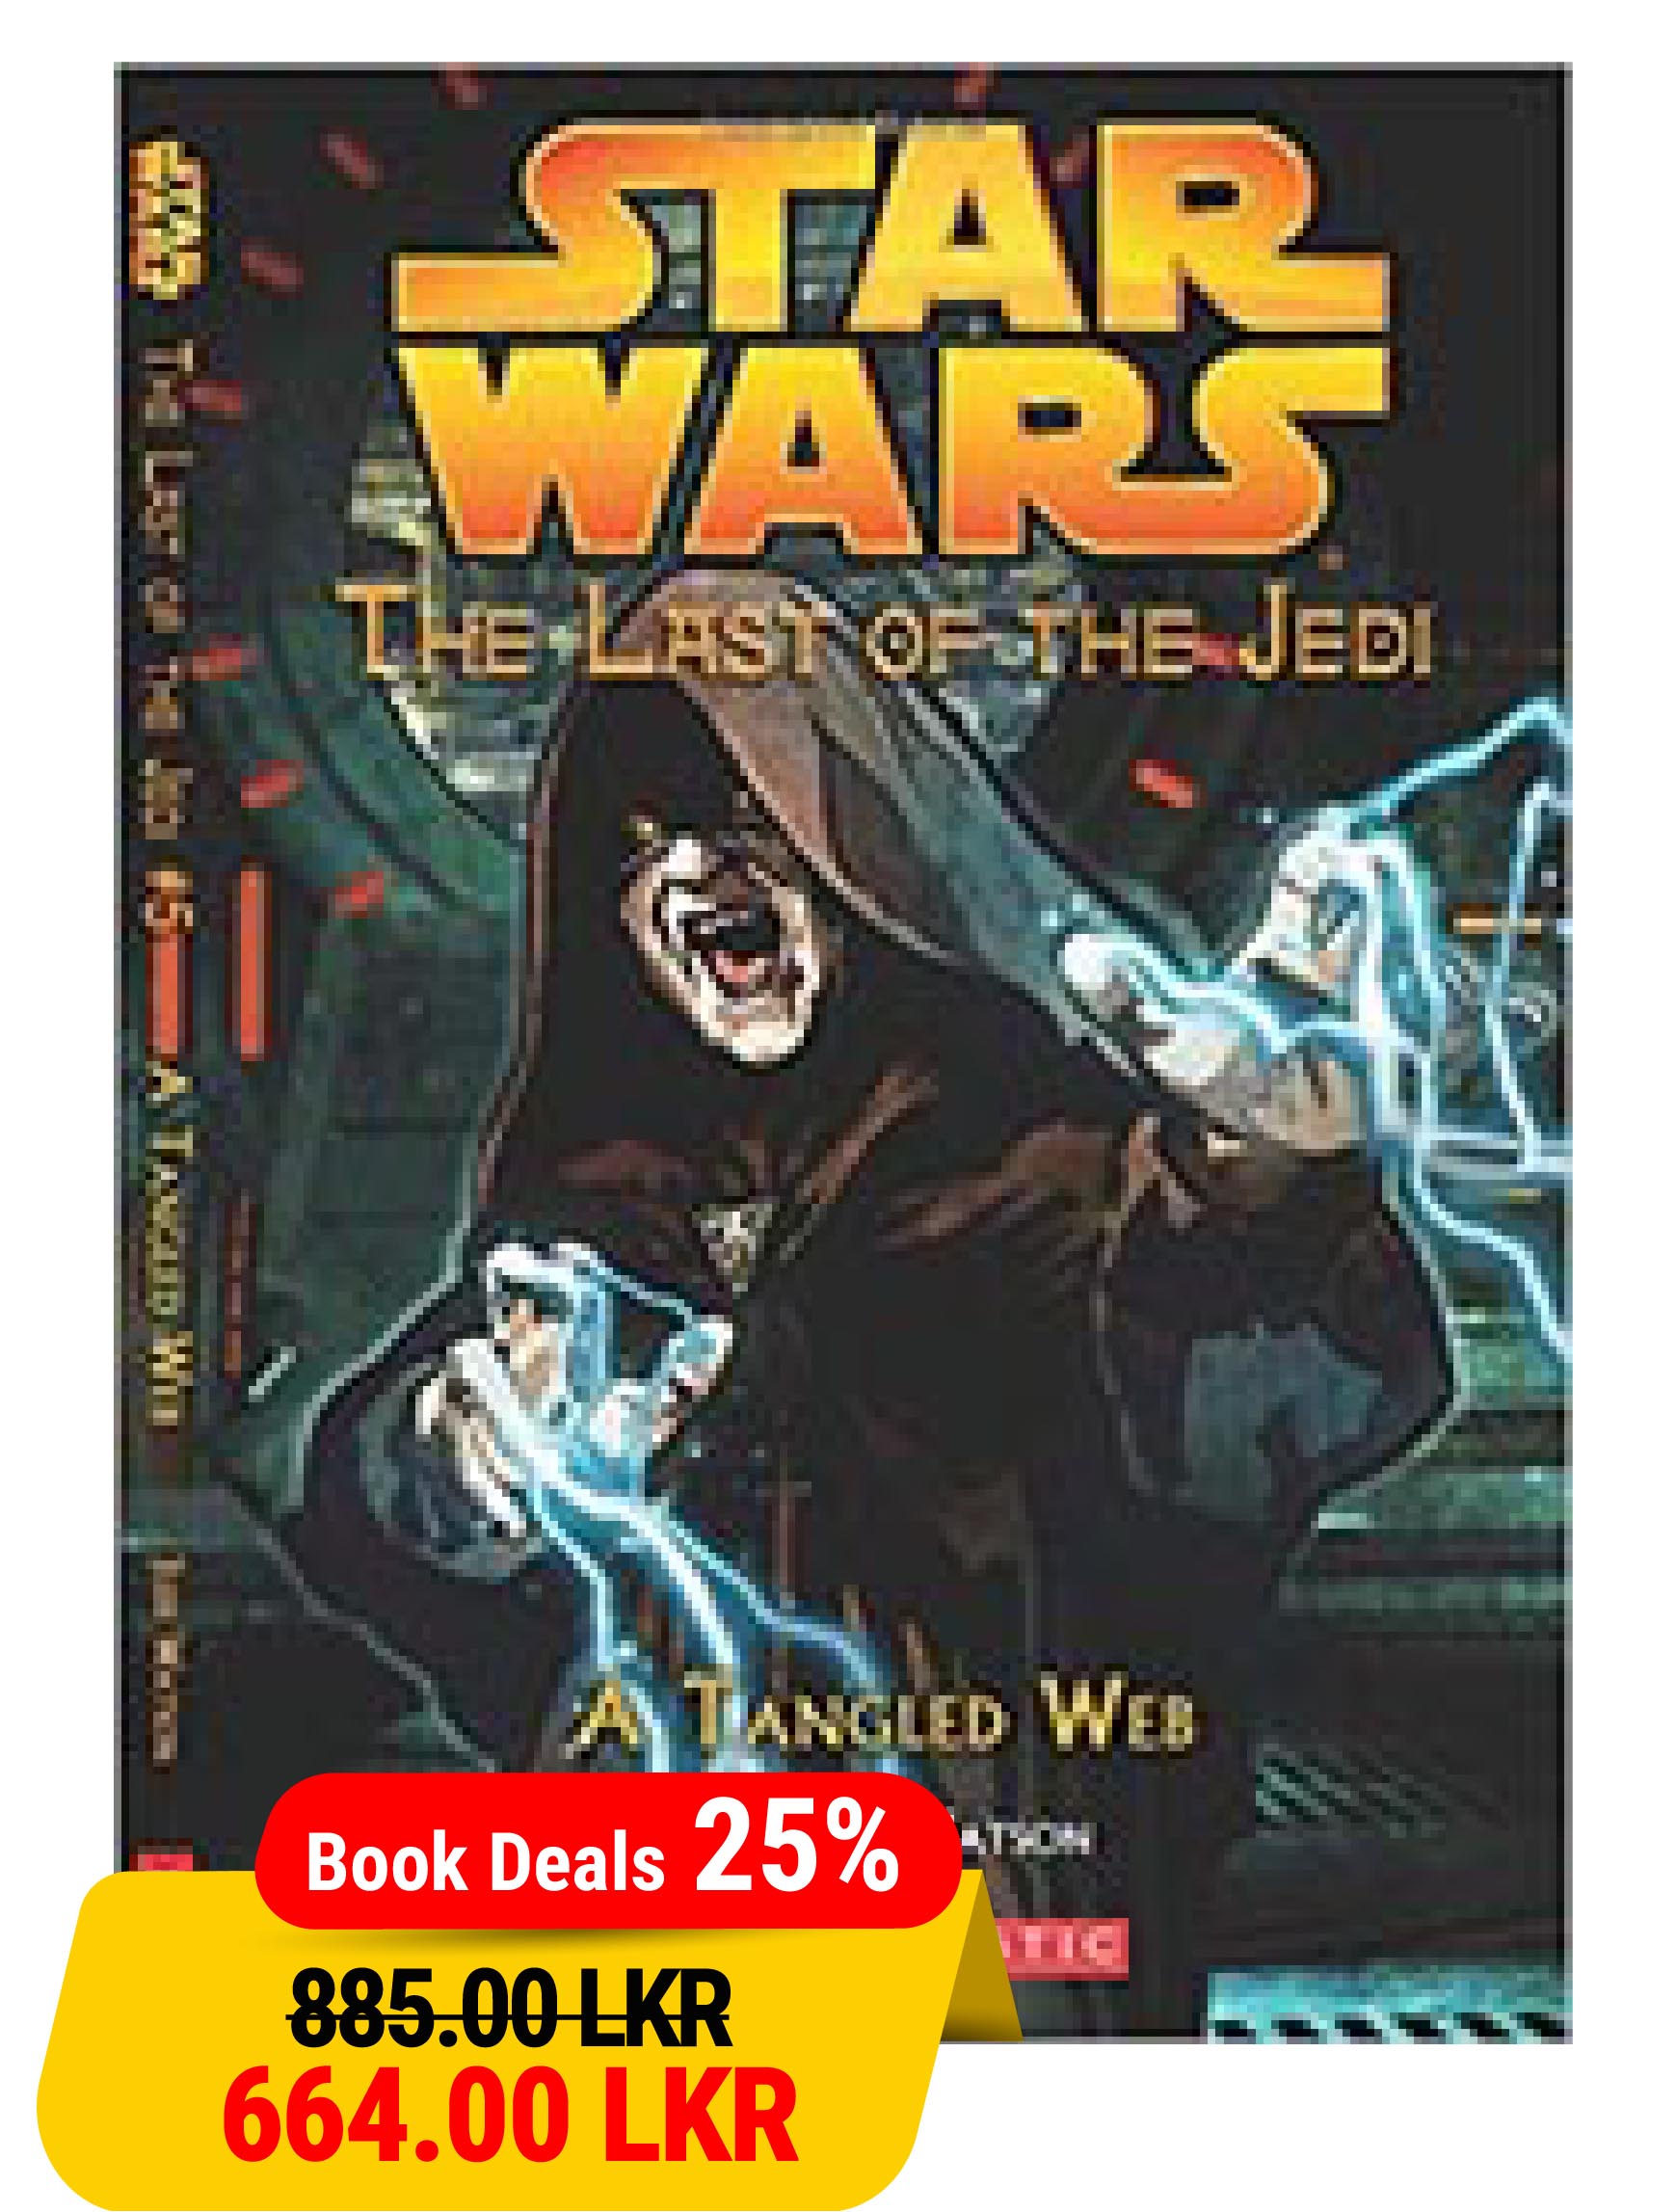 Star Wars The Last Of The Jedi #05 : A Tangled Web